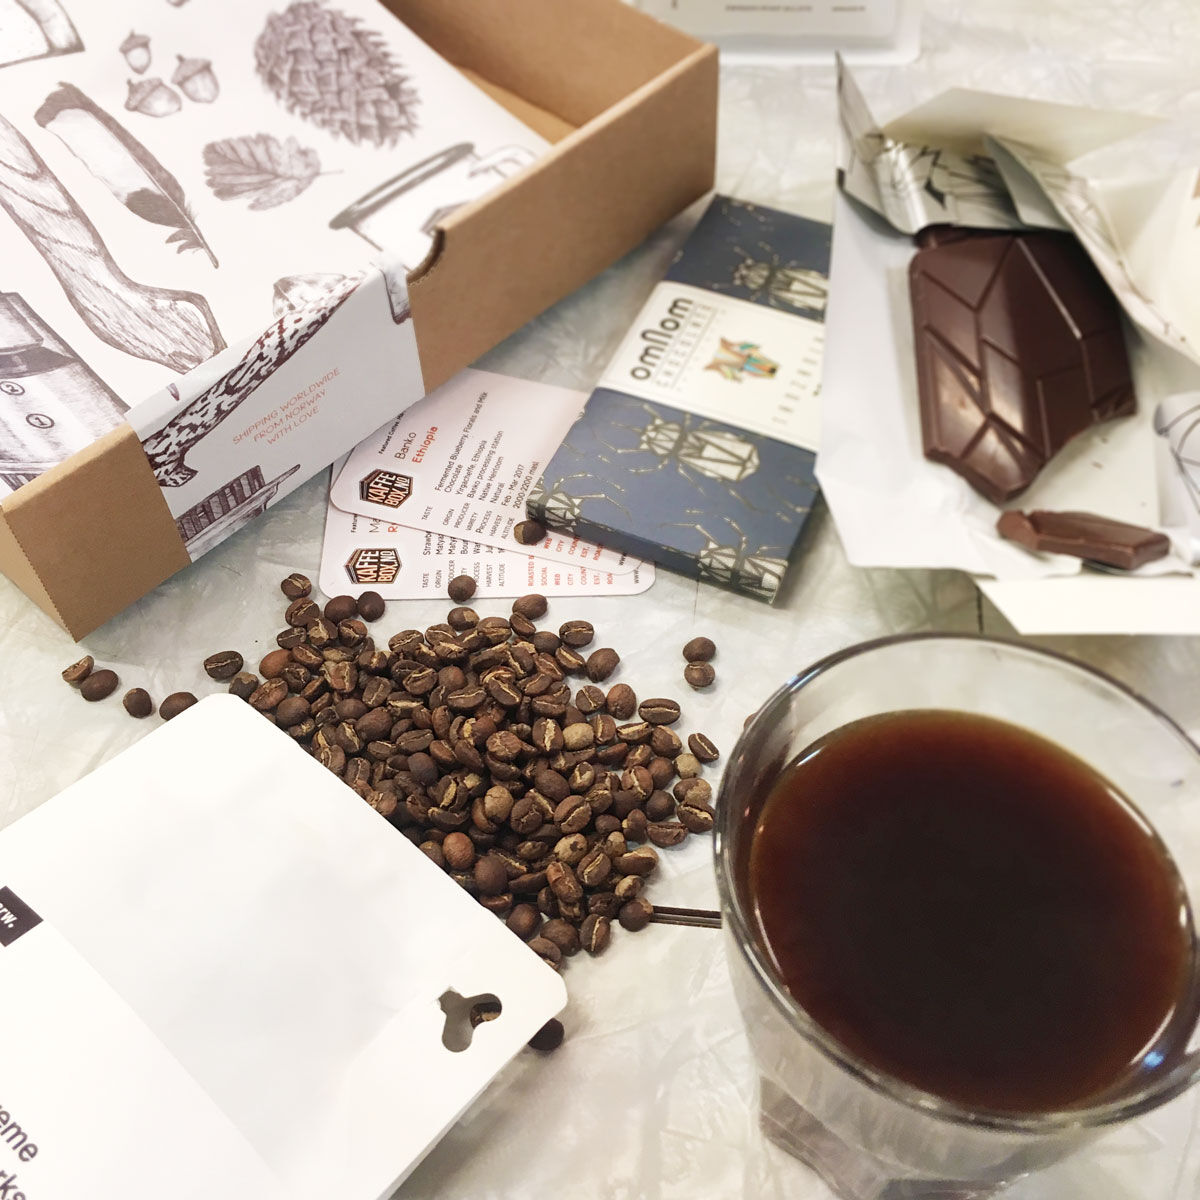 KaffeBox Chocolate Pairing Subscription - No coffee (only chocolate), 1 bar